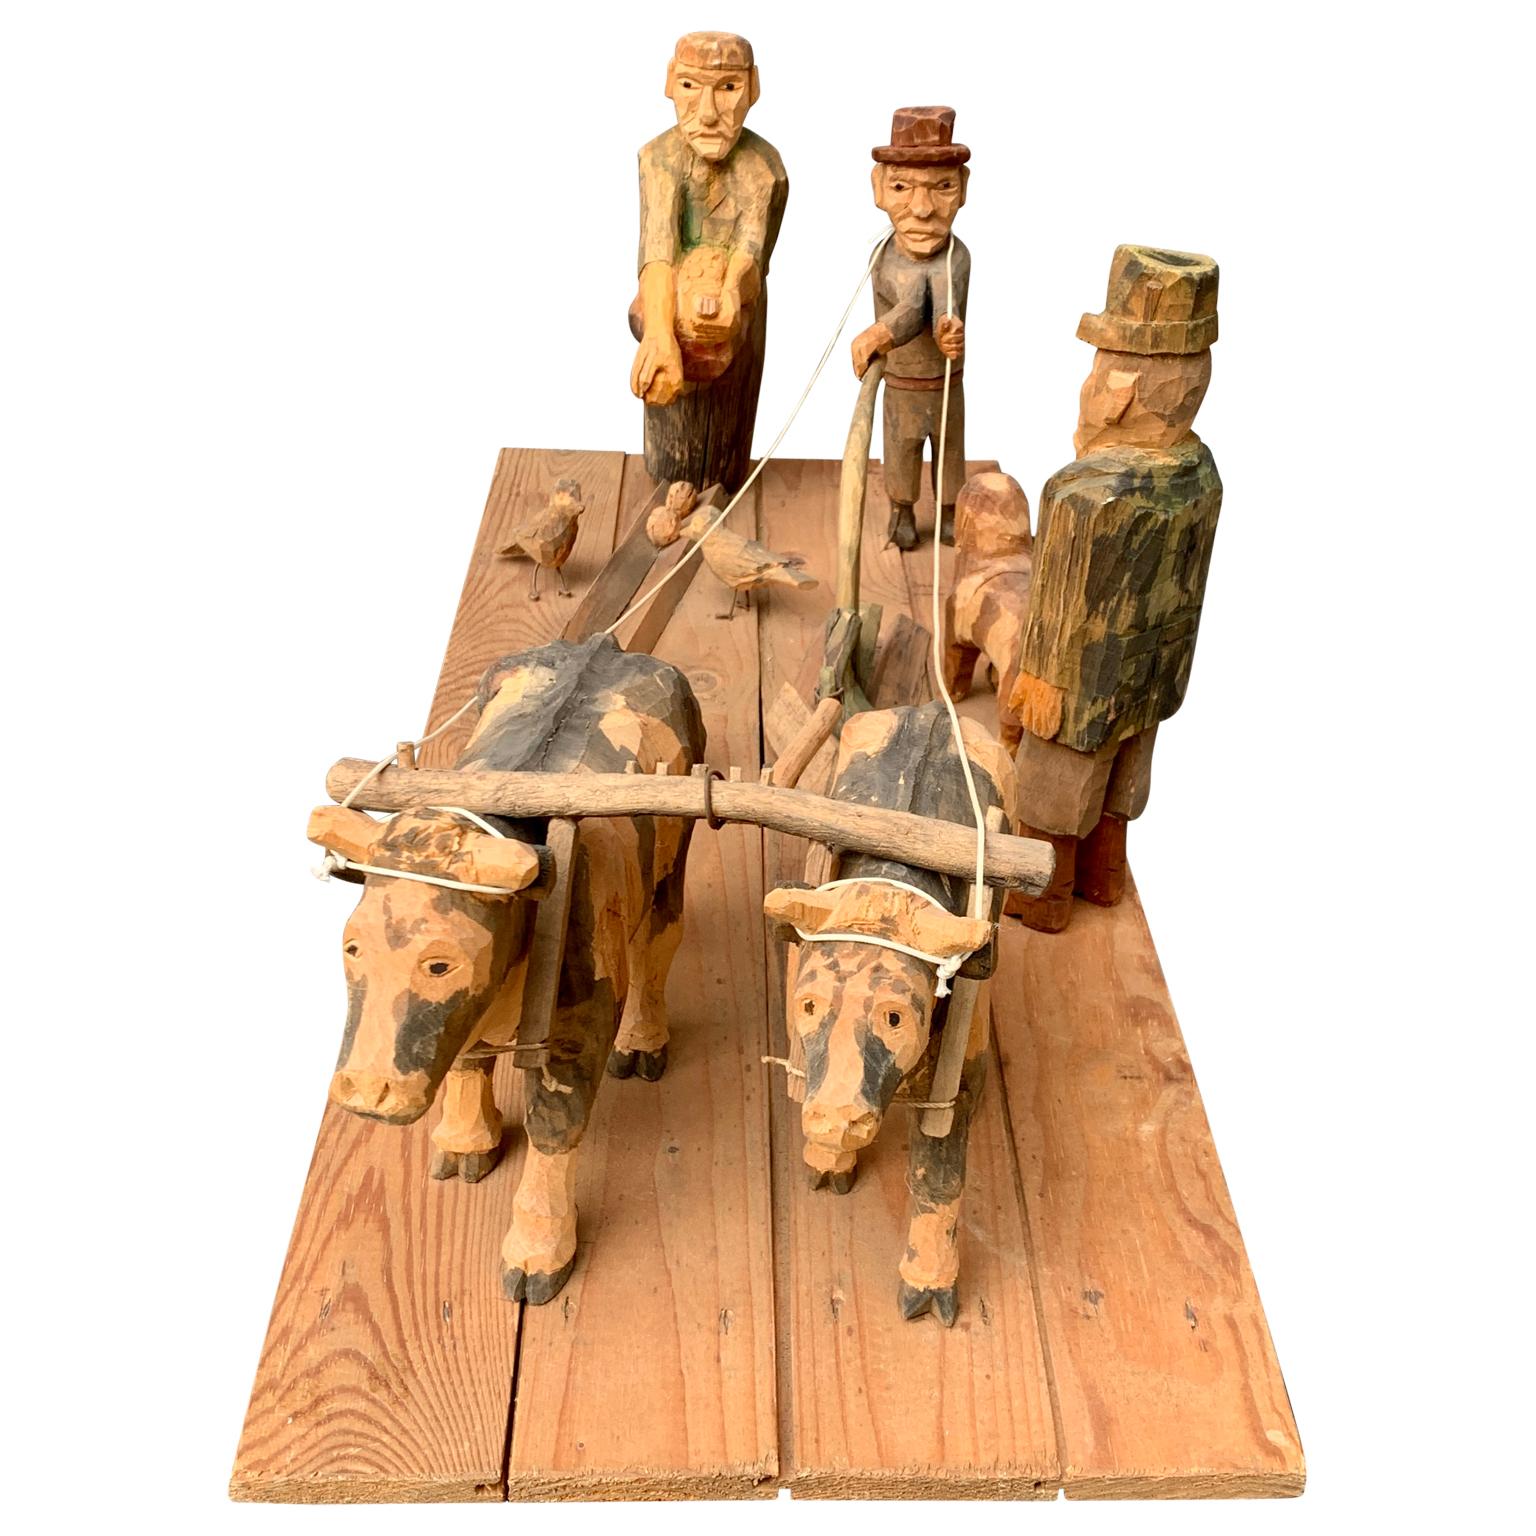 A Swedish sculpture of wooden, carved and painted figures of potato farmers working in the Scandinavian fields. Sweden has a long and well known tradition of hand carved wooden folk art. It started in the rural class, the so called 